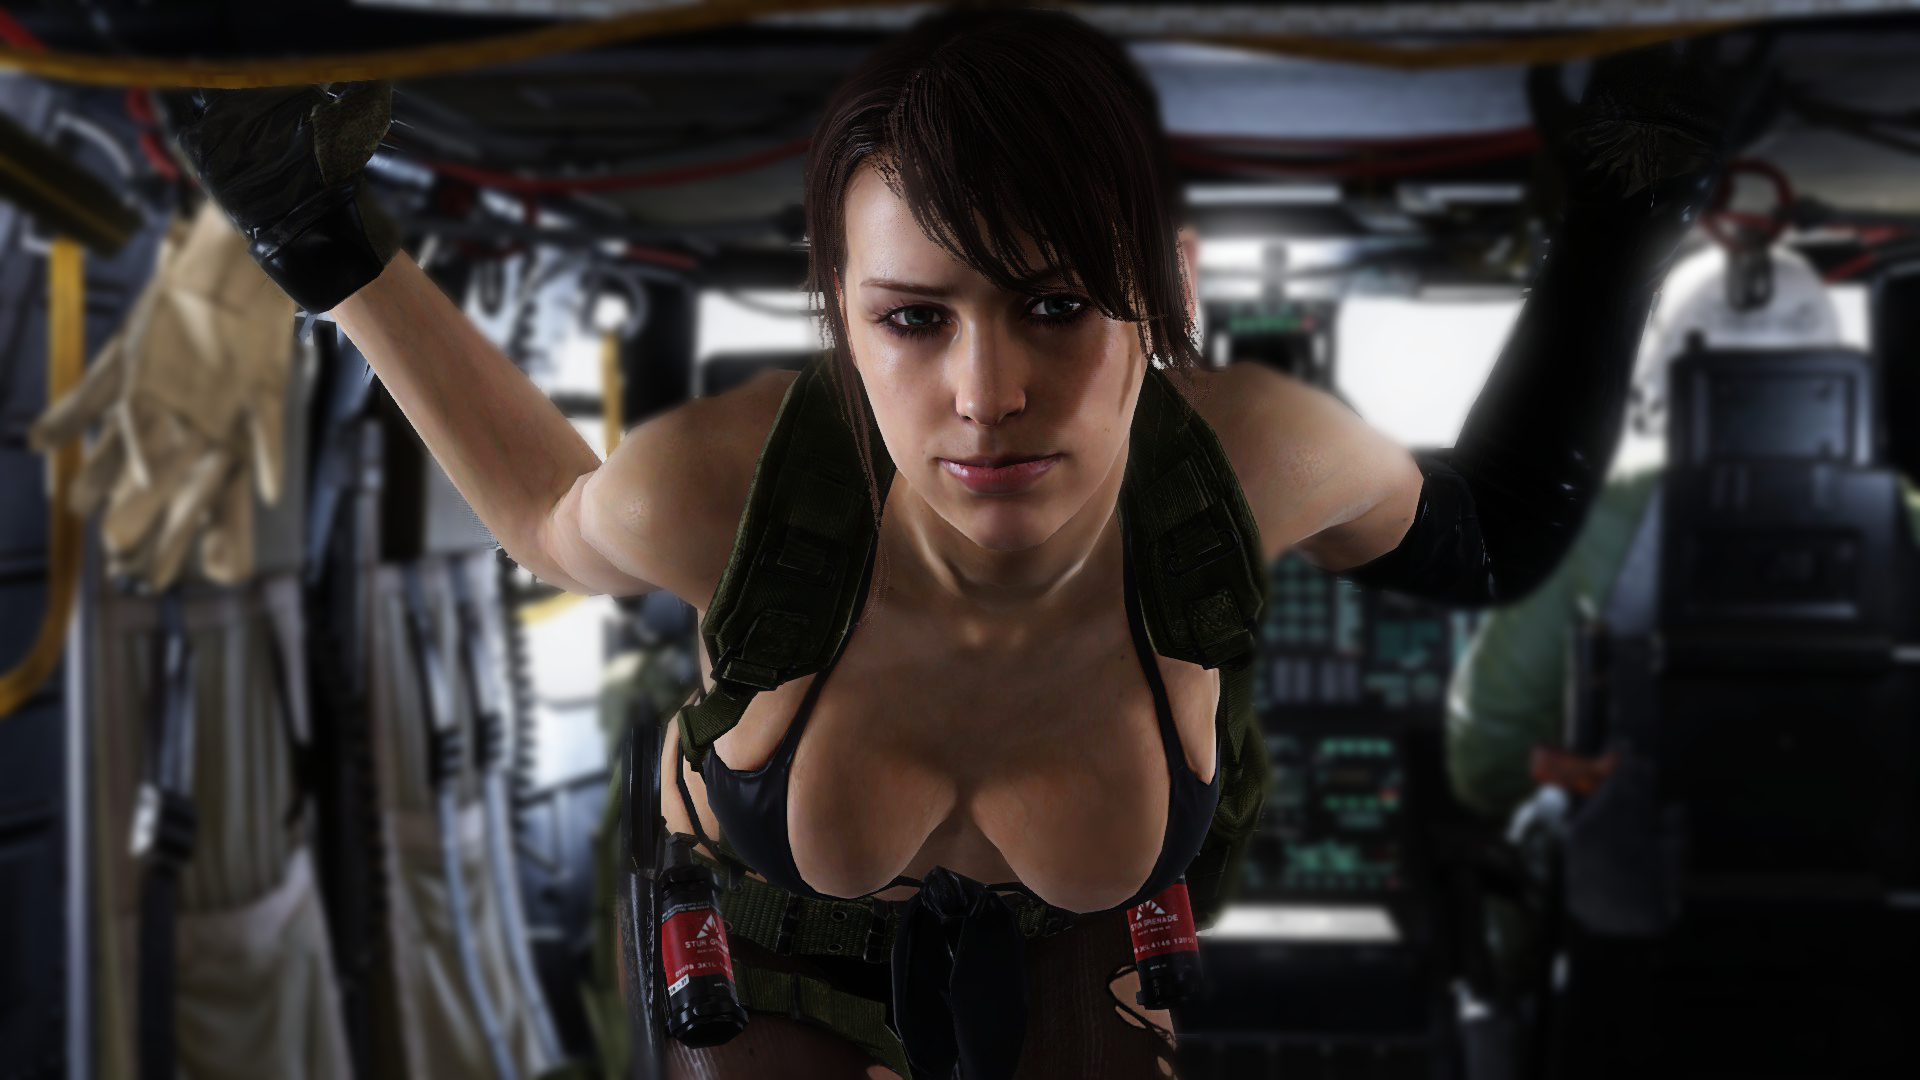 General 1920x1080 Metal Gear Solid V: The Phantom Pain Quiet (metal gear) women cleavage Metal Gear Solid boobs video game girls video games video game characters screen shot big boobs